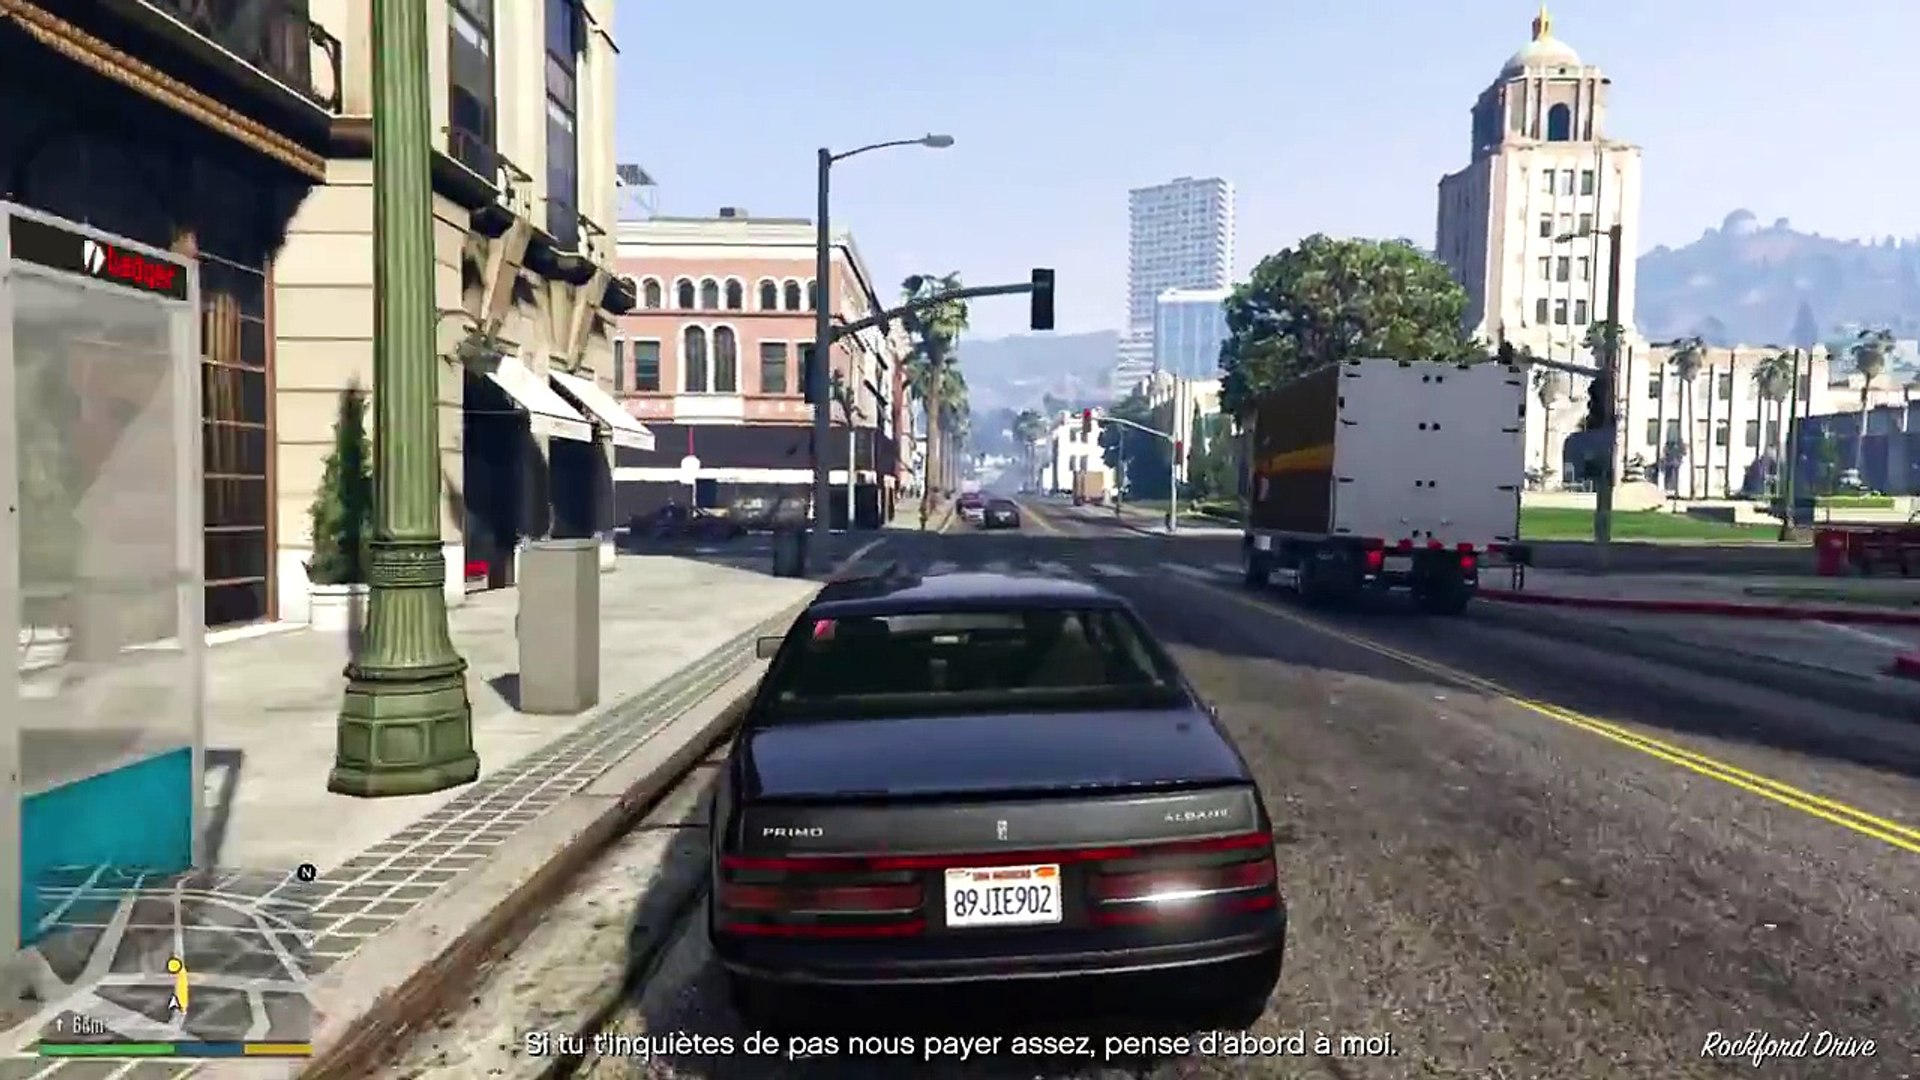 Grand Theft Auto V Gameplay (PC HD) [1080p60FPS] 